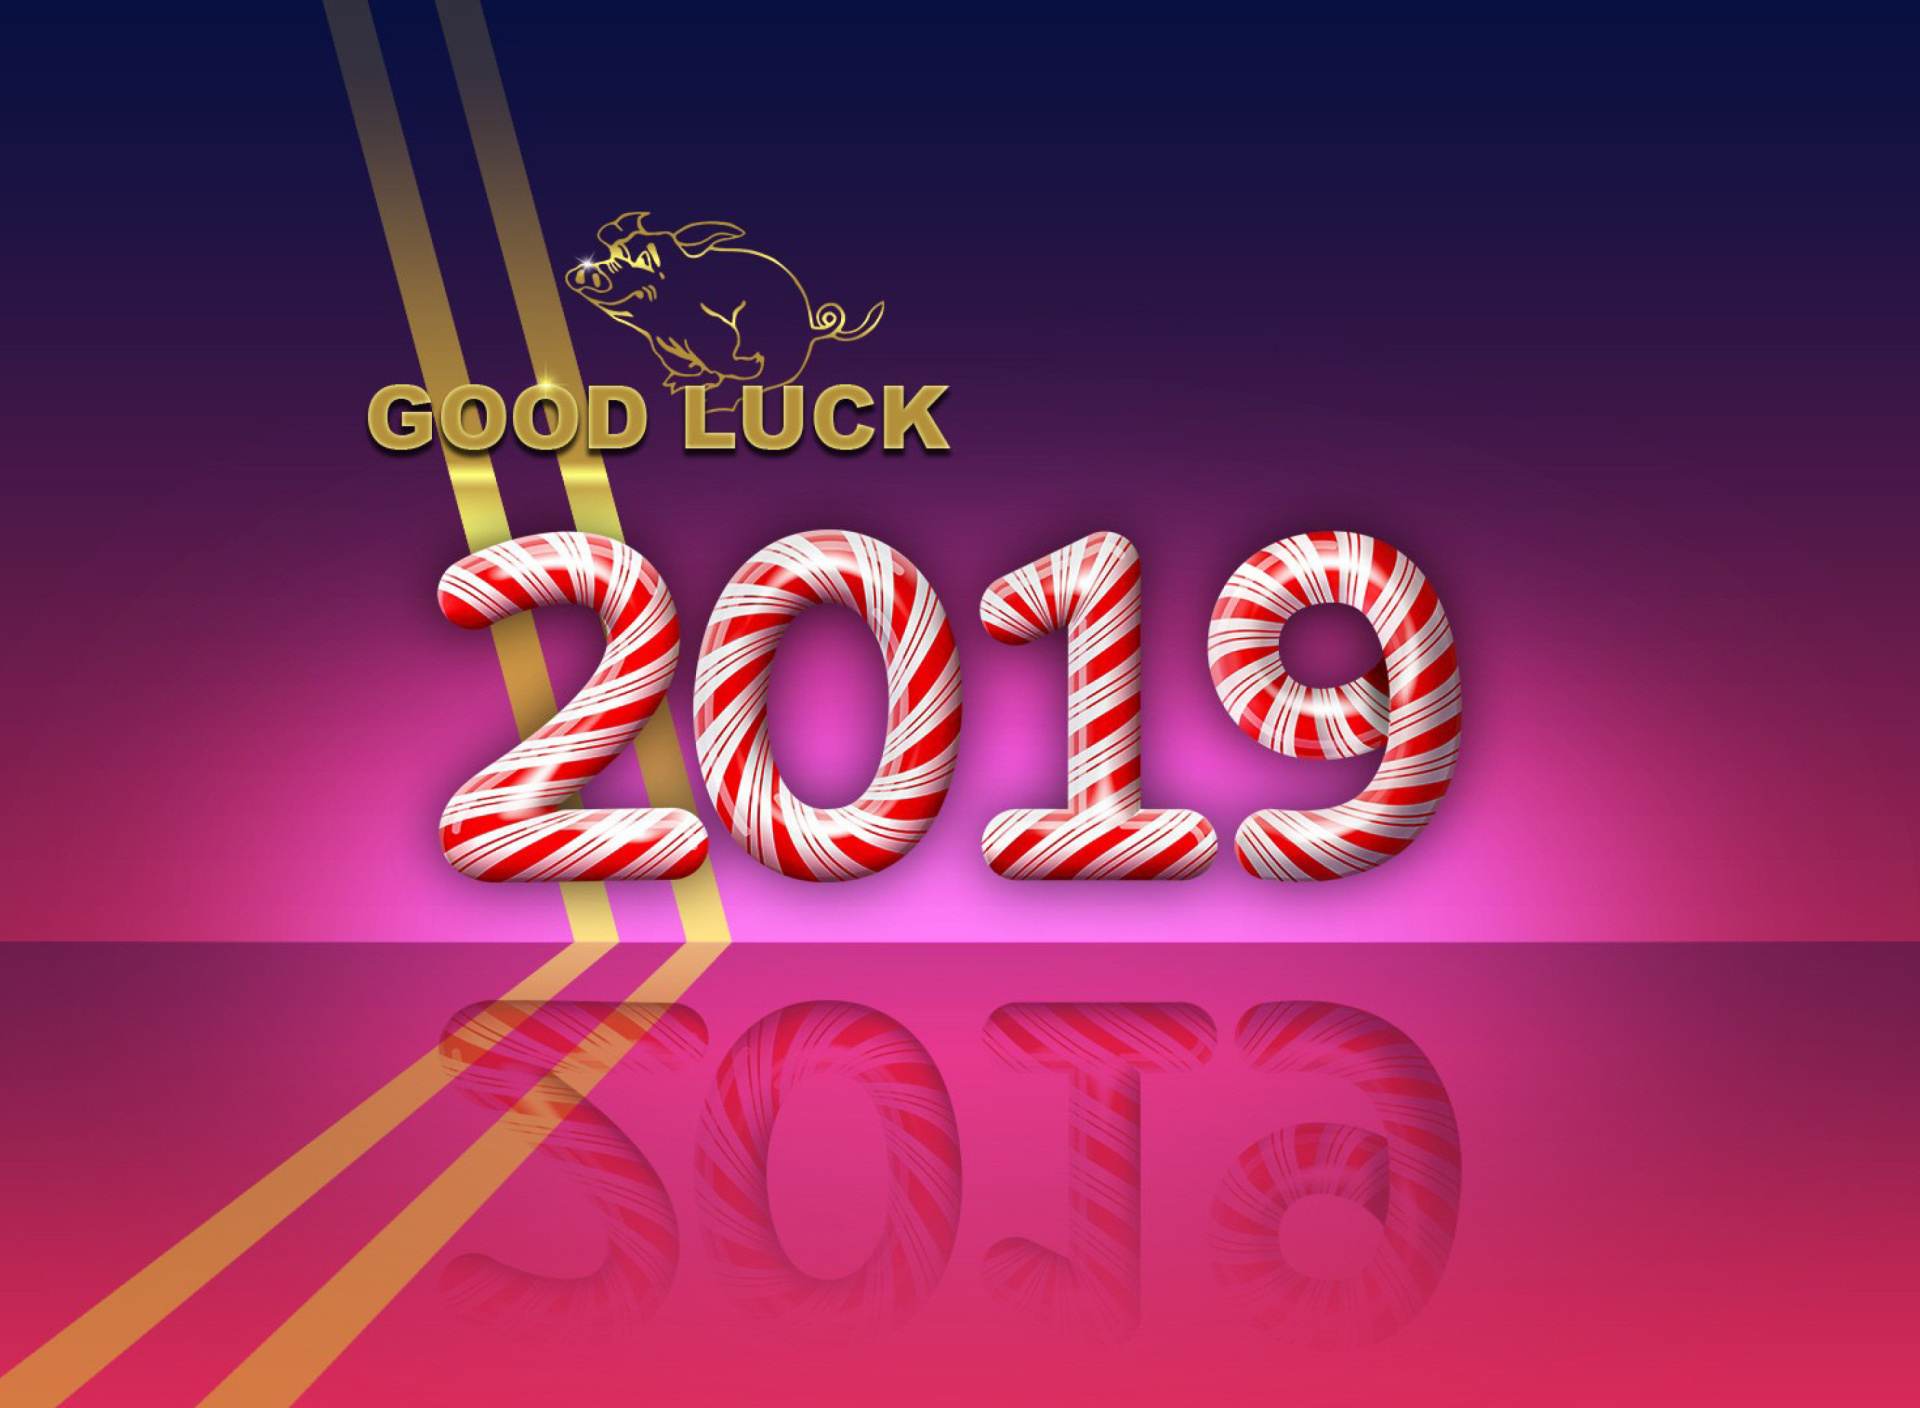 Good Luck in New Year 2019 wallpaper 1920x1408